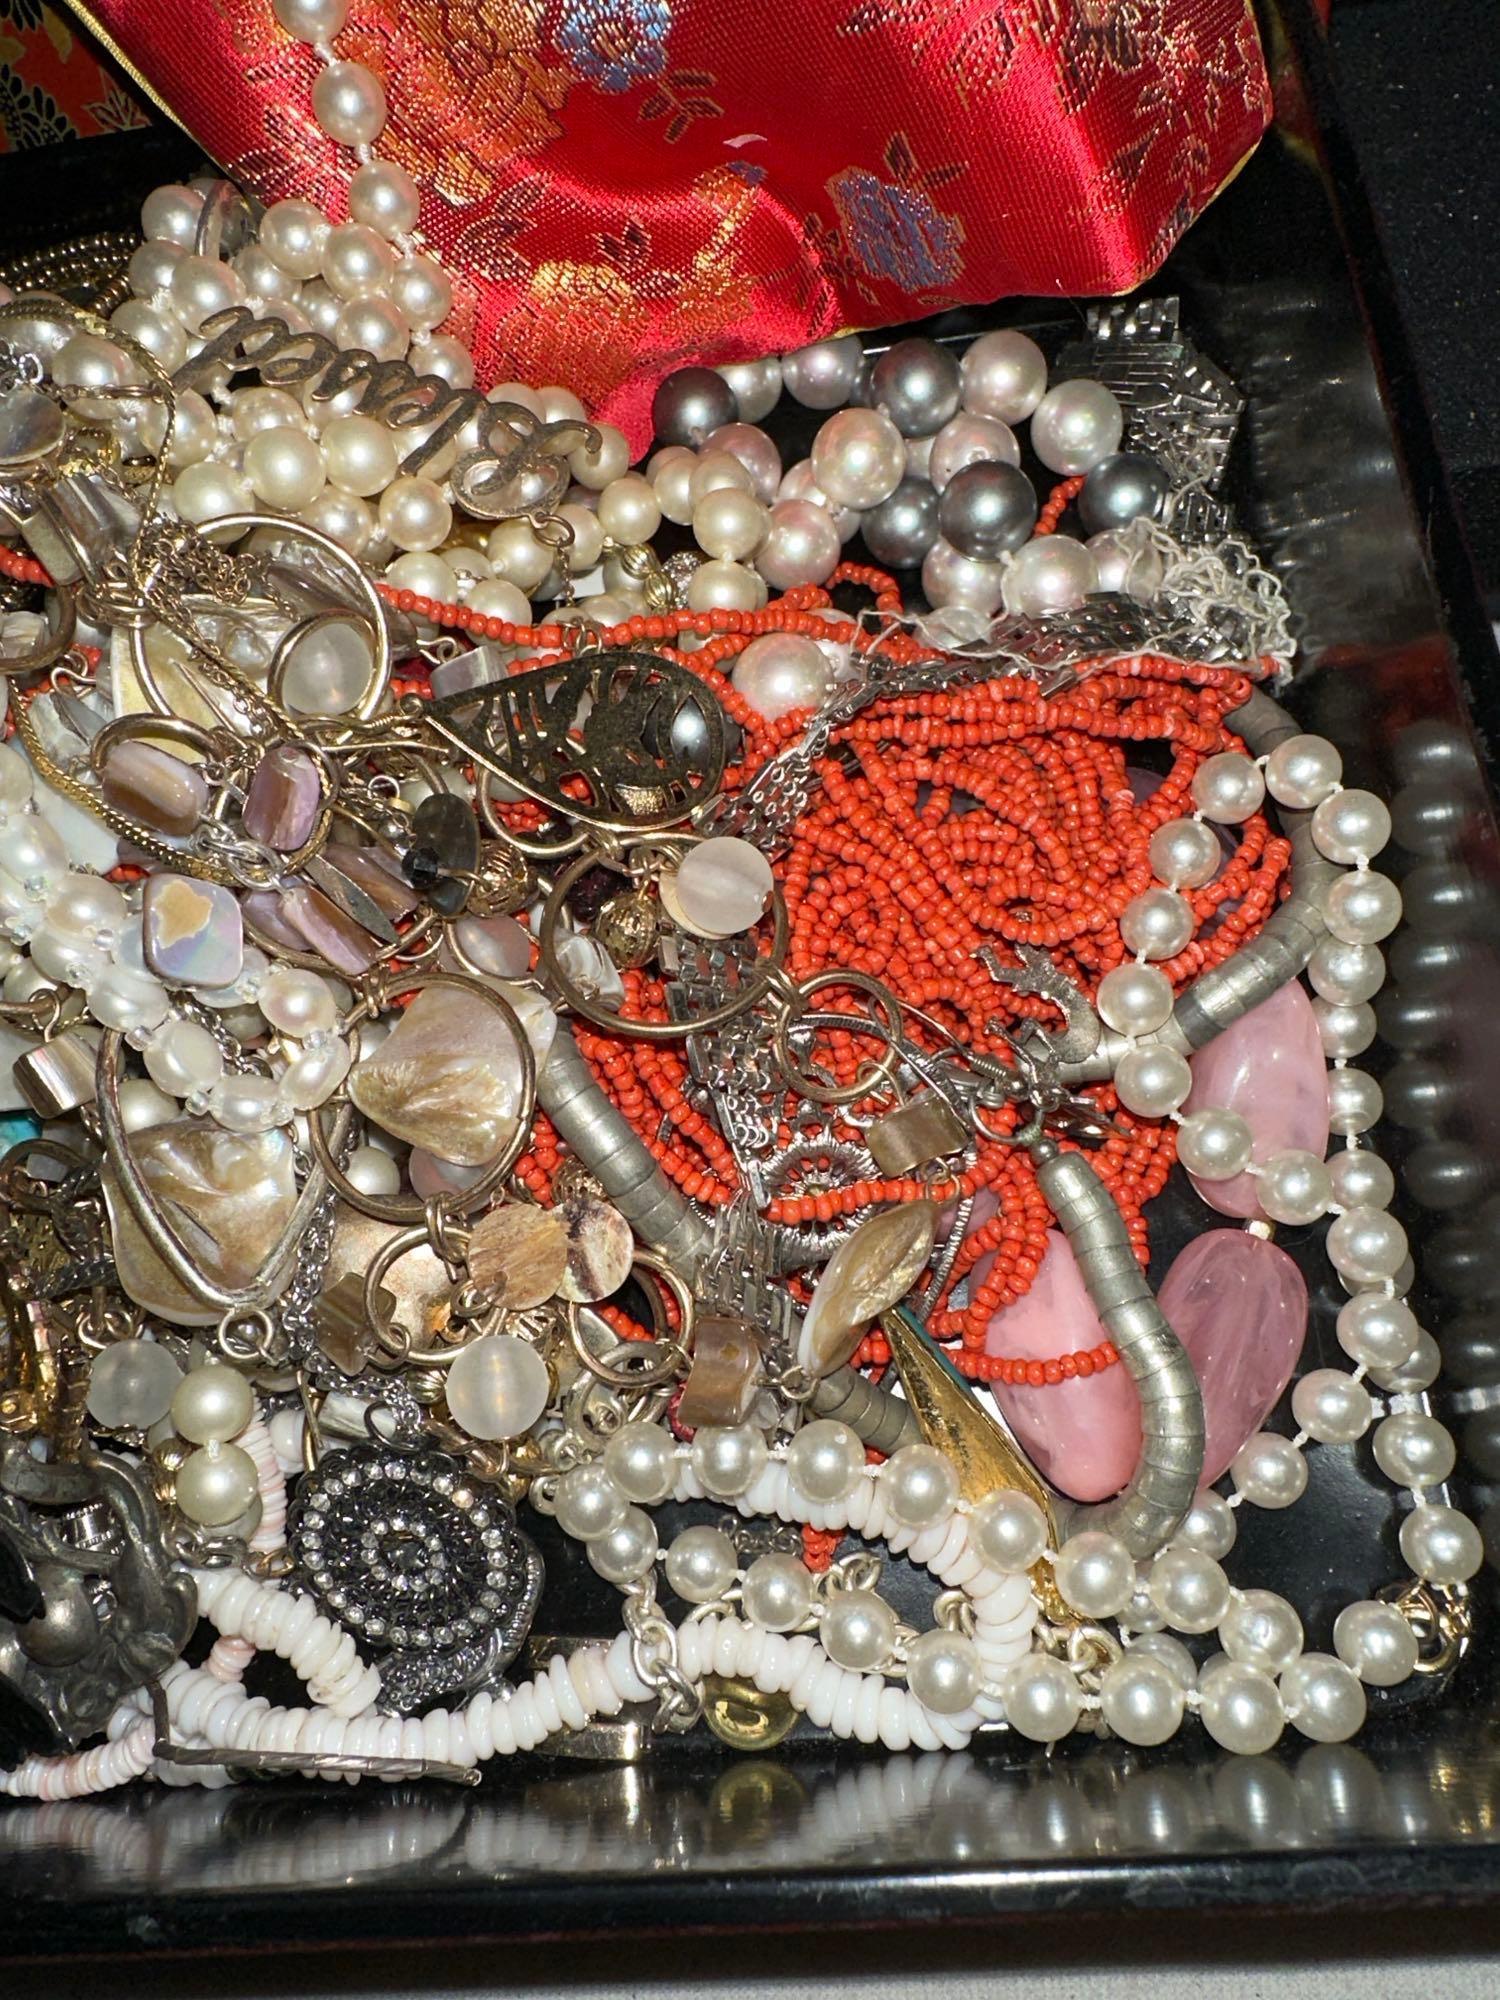 Lot of Unsearched Jewelry from Abandoned Storage unit